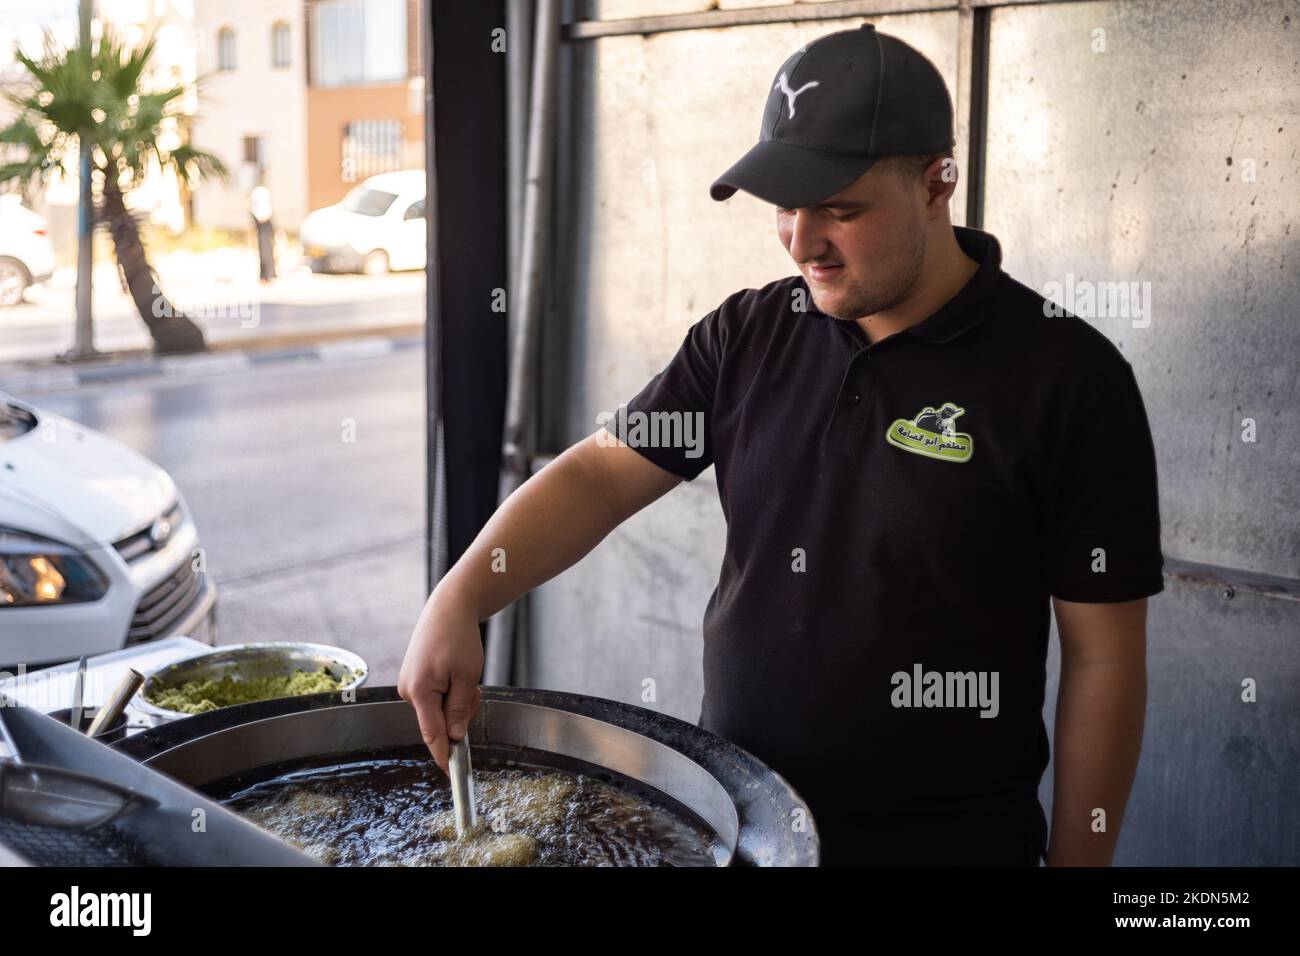 Ramallah, Ramallah and al-Bireh Governorate, Palestine - July 22 2022: A Smiling Young Arab Man is Cooking Falafel in a Big Pot full of Oil Stock Photo